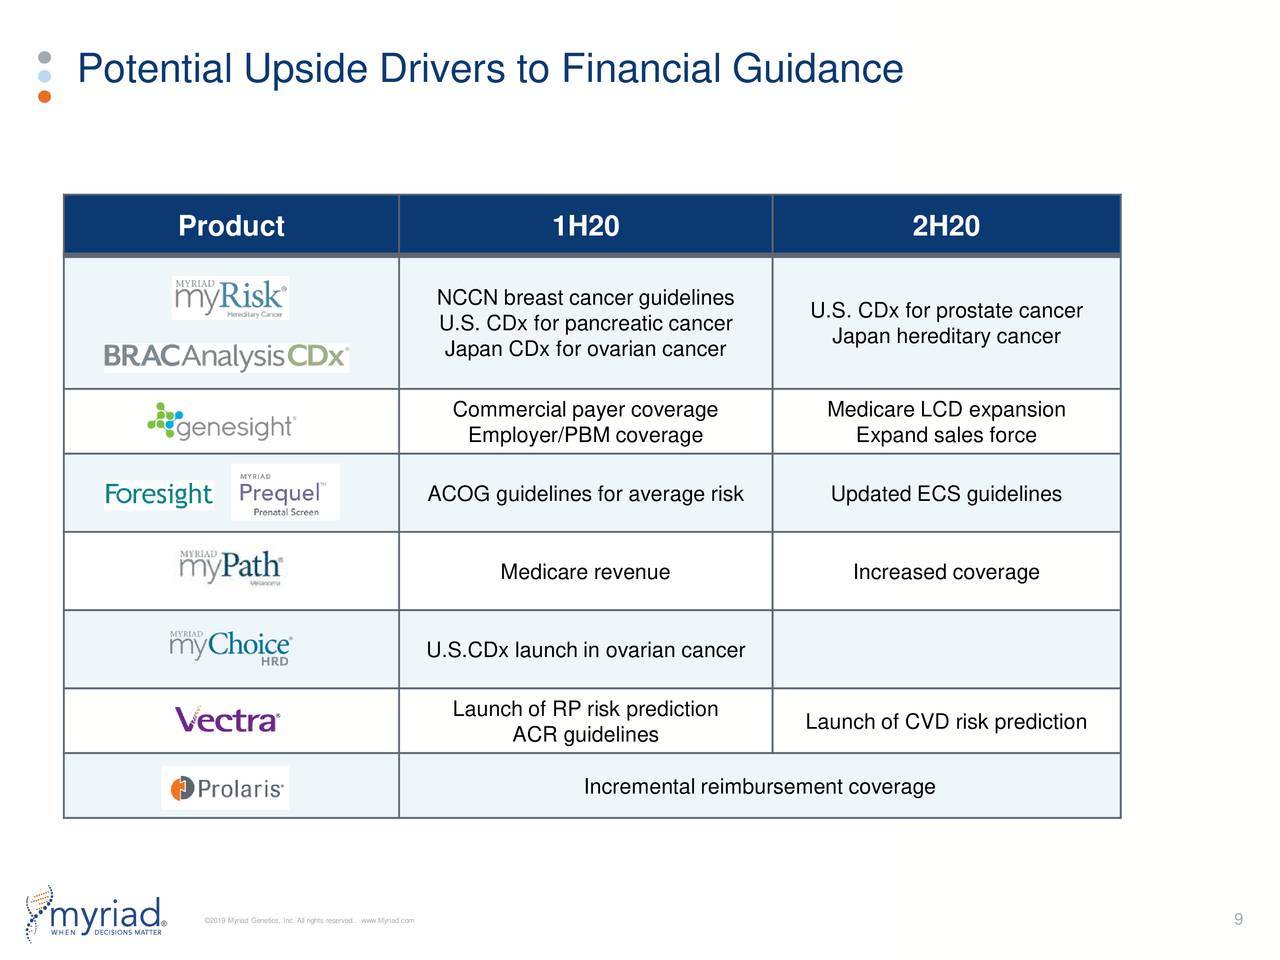 Potential Upside Drivers to Financial Guidance